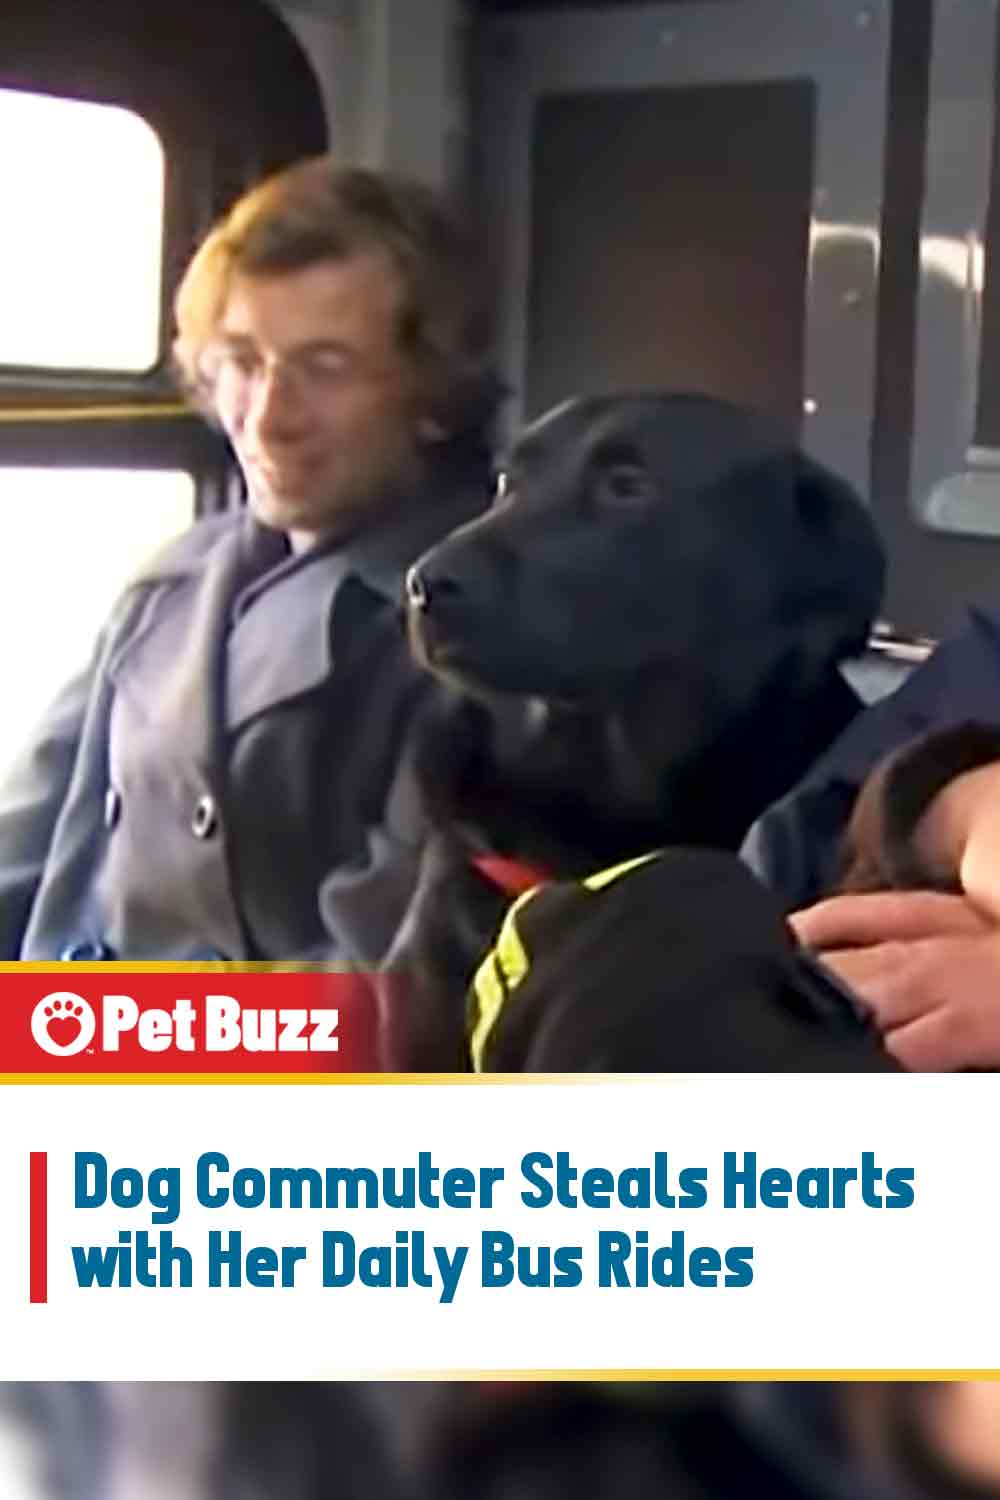 Dog Commuter Steals Hearts with Her Daily Bus Rides